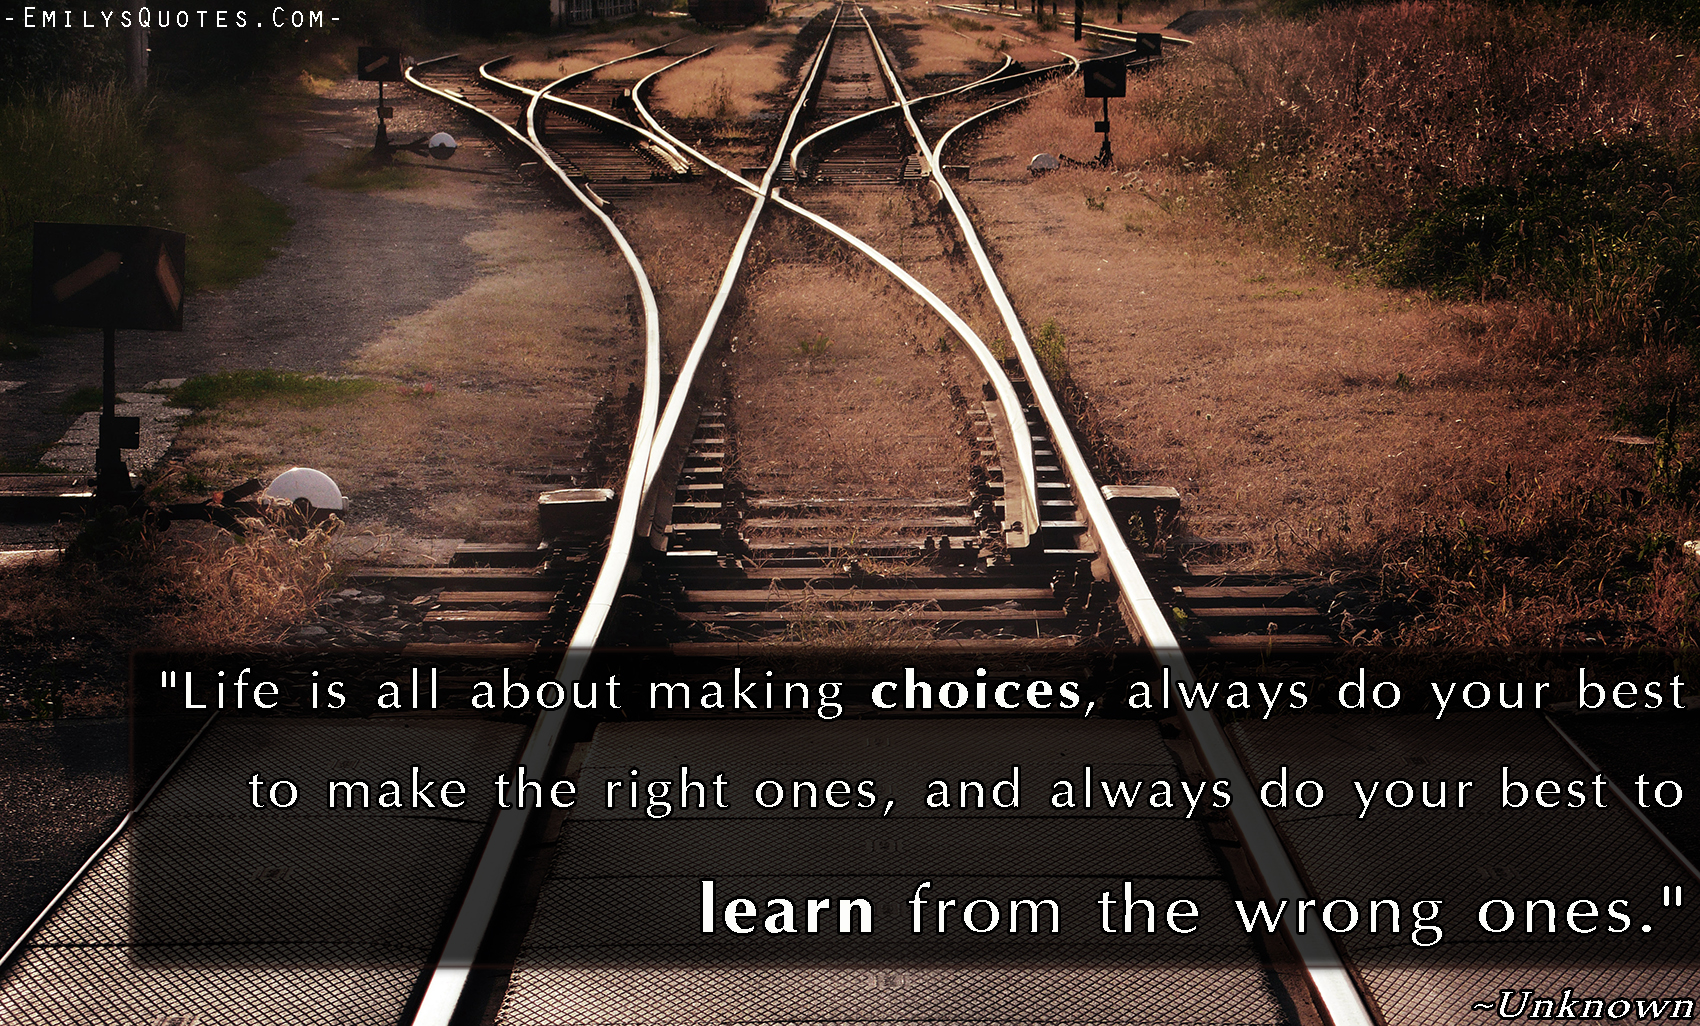 Life is all about making choices, always do your best to make the right  ones, and always do your best to learn from the wrong ones | Popular  inspirational quotes at EmilysQuotes